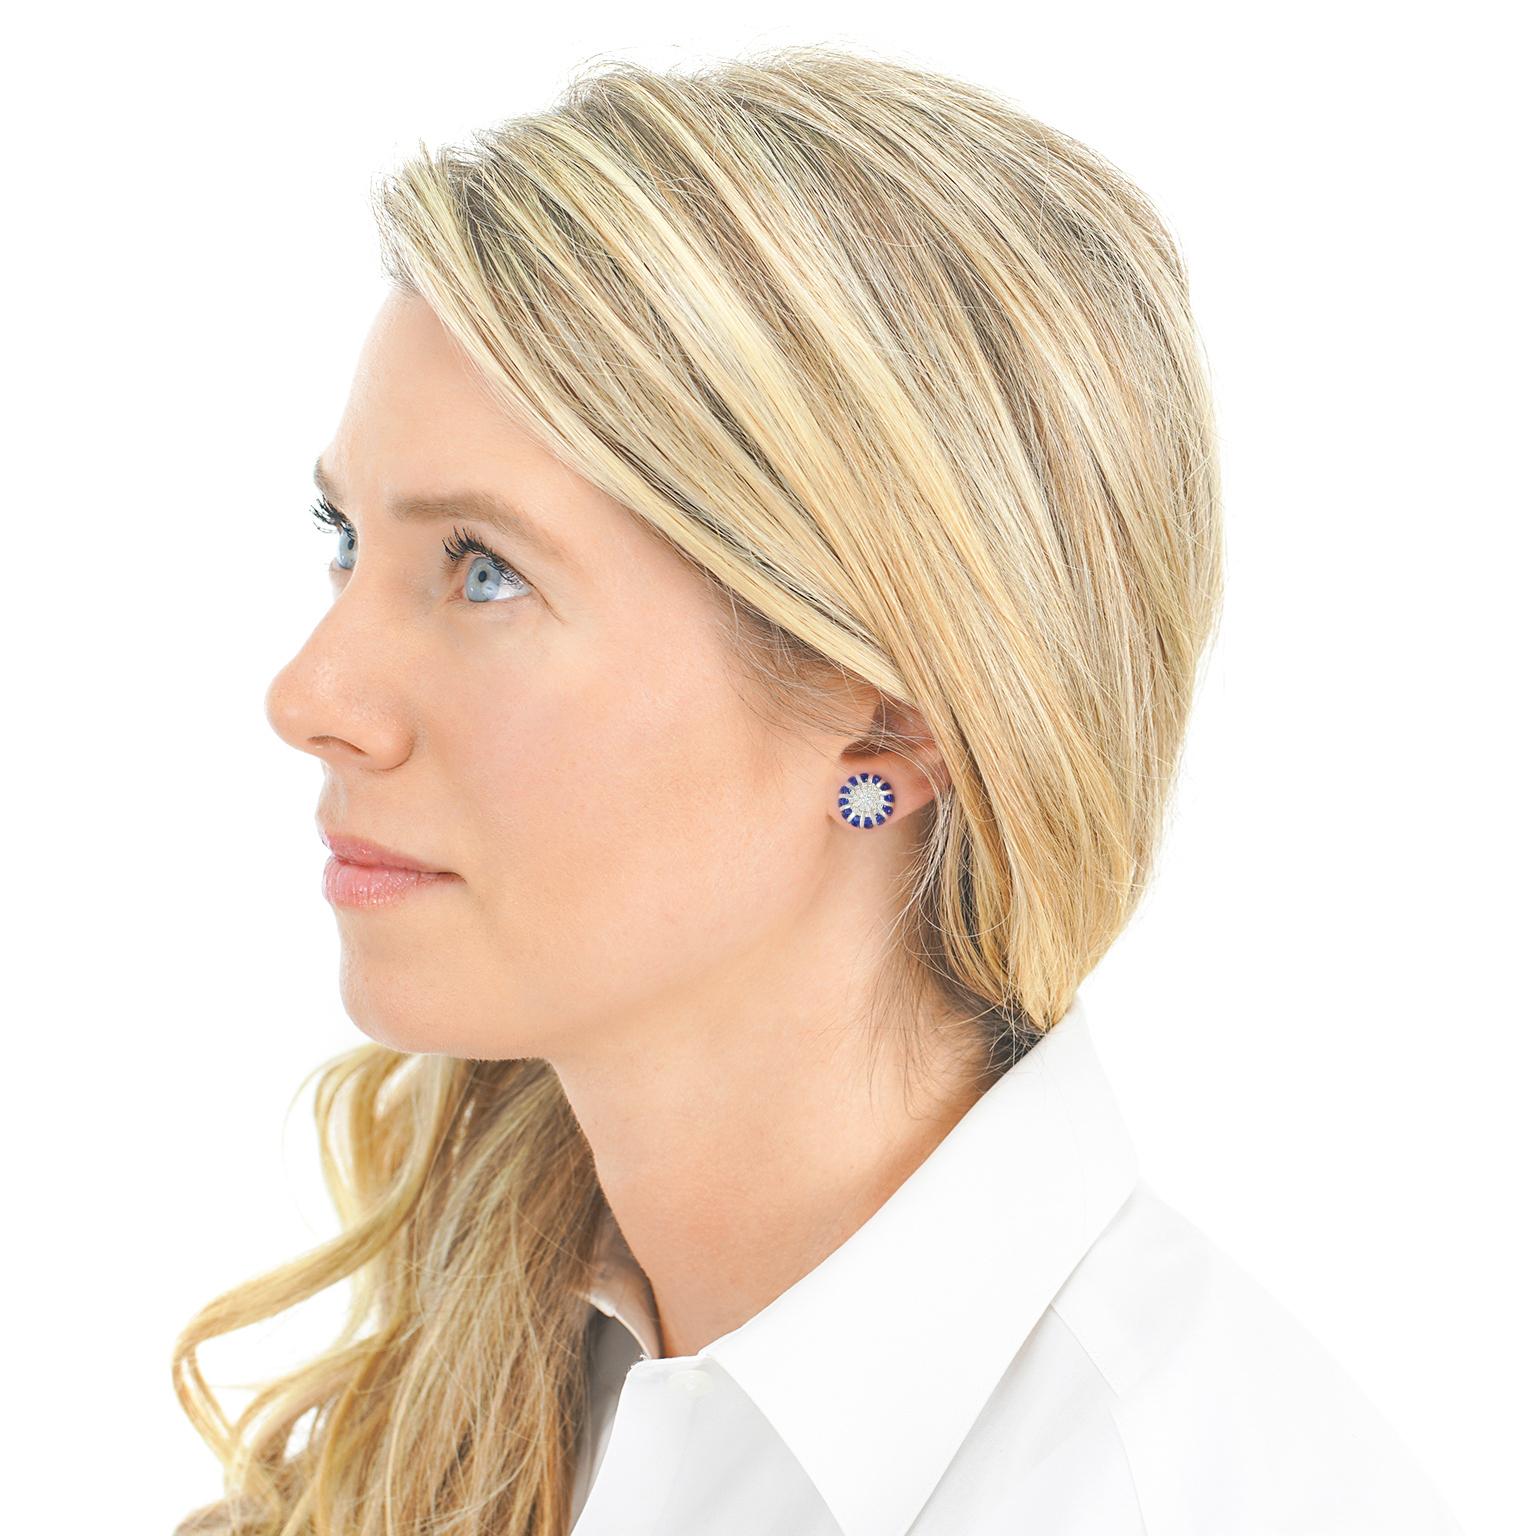 Circa 2000s, 18k, by Spark Creations, New York. These stunning earrings from Spark Creations feature lush cornflower blue sapphires surrounding a brilliant white diamond (G color, VS clarity) center. Perfect for cocktail attire or everyday wear, the